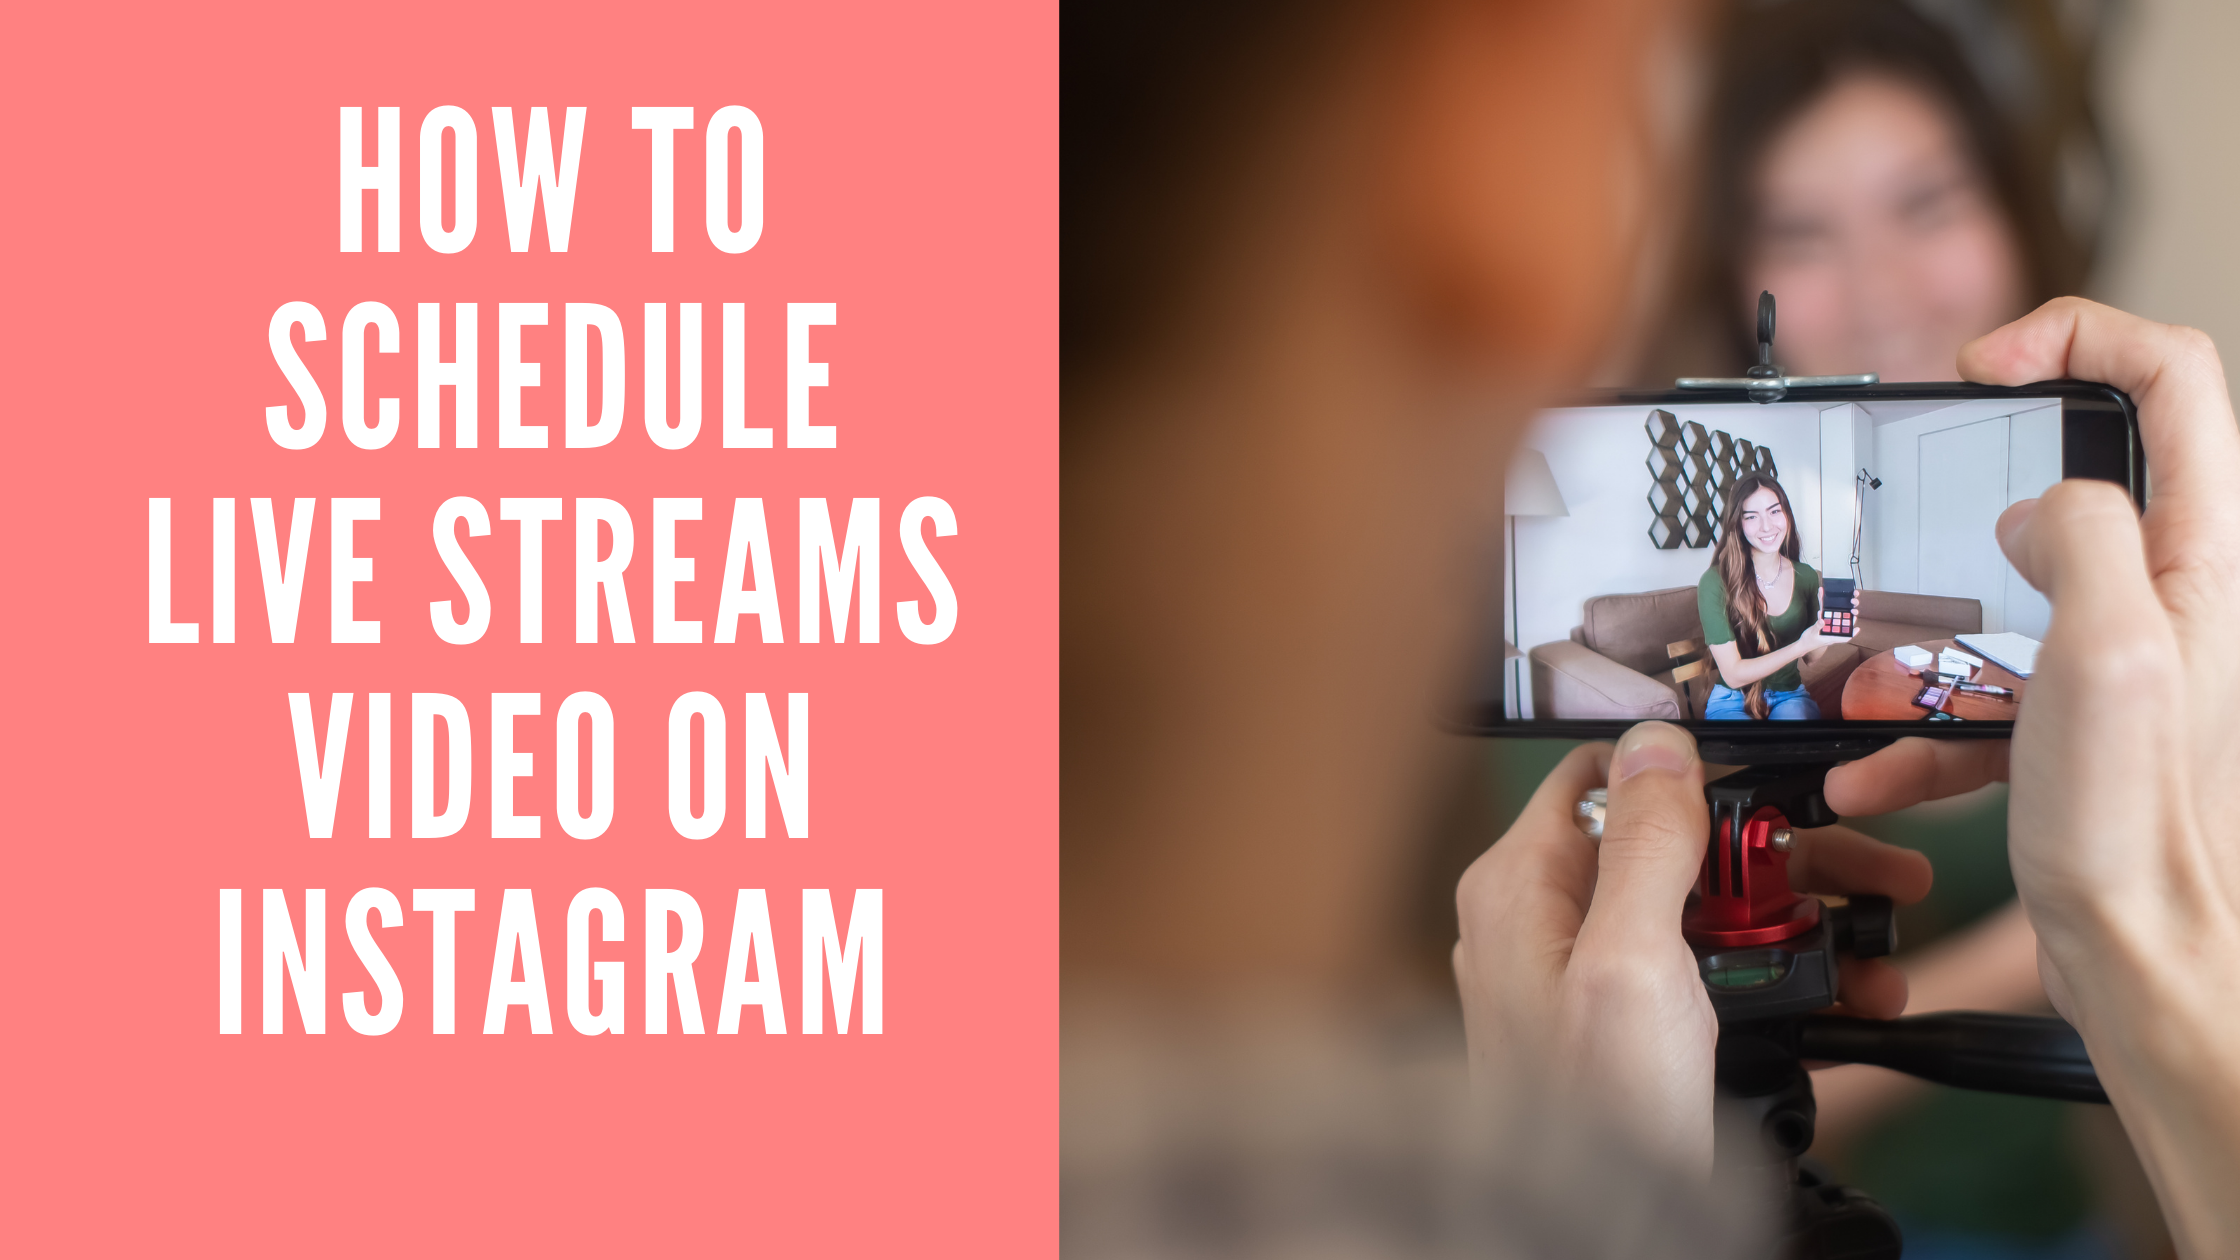 How To Schedule Live Streams Video On Instagram?